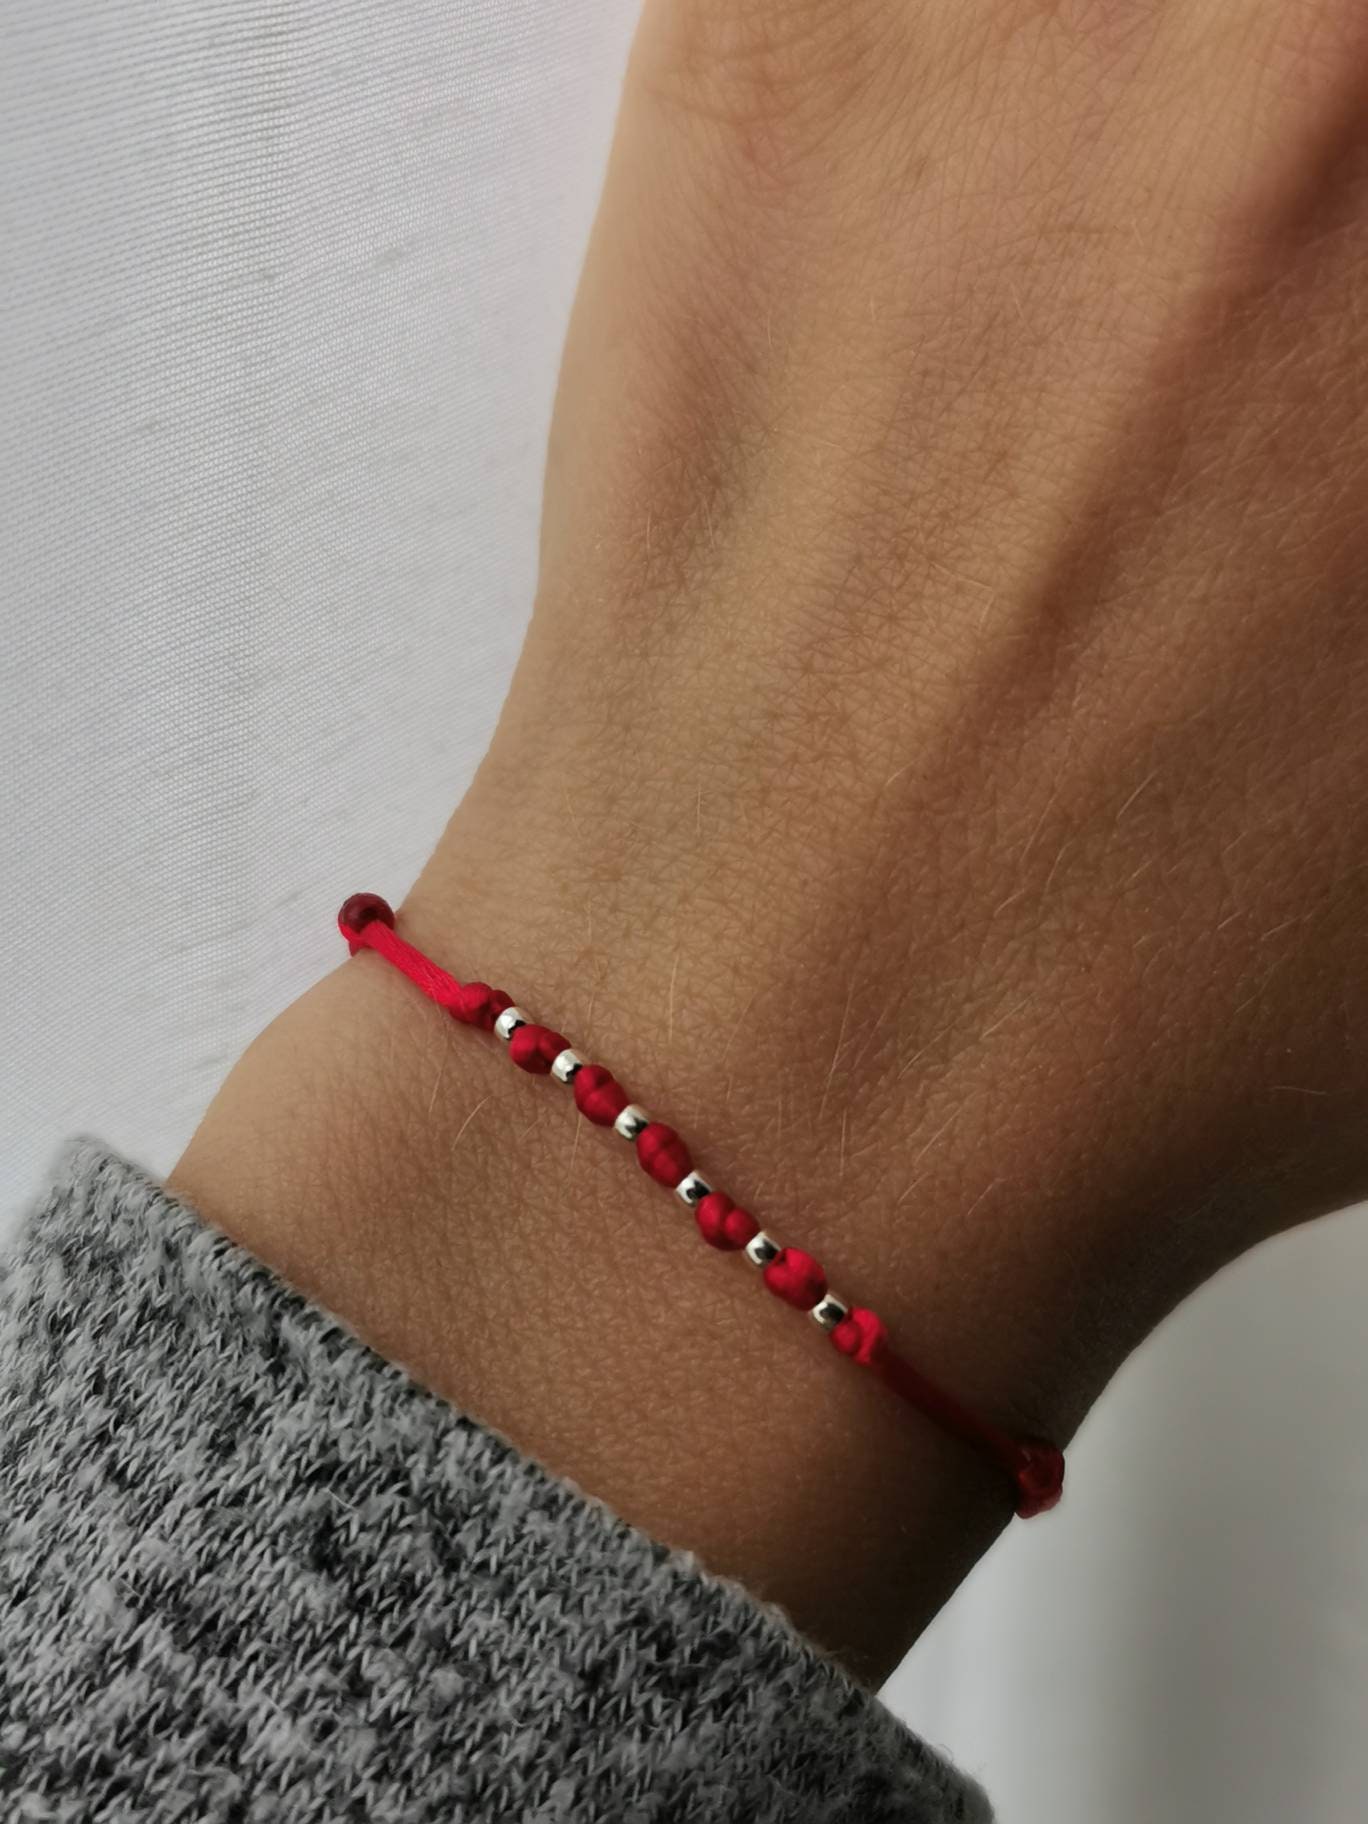 Seven Knots Red Bracelet. Kabbalah Red String of Fate. Good Luck Red  Thread. 7 Knots Protection Jewelry. Women's Red Bracelet. Gift for Her 